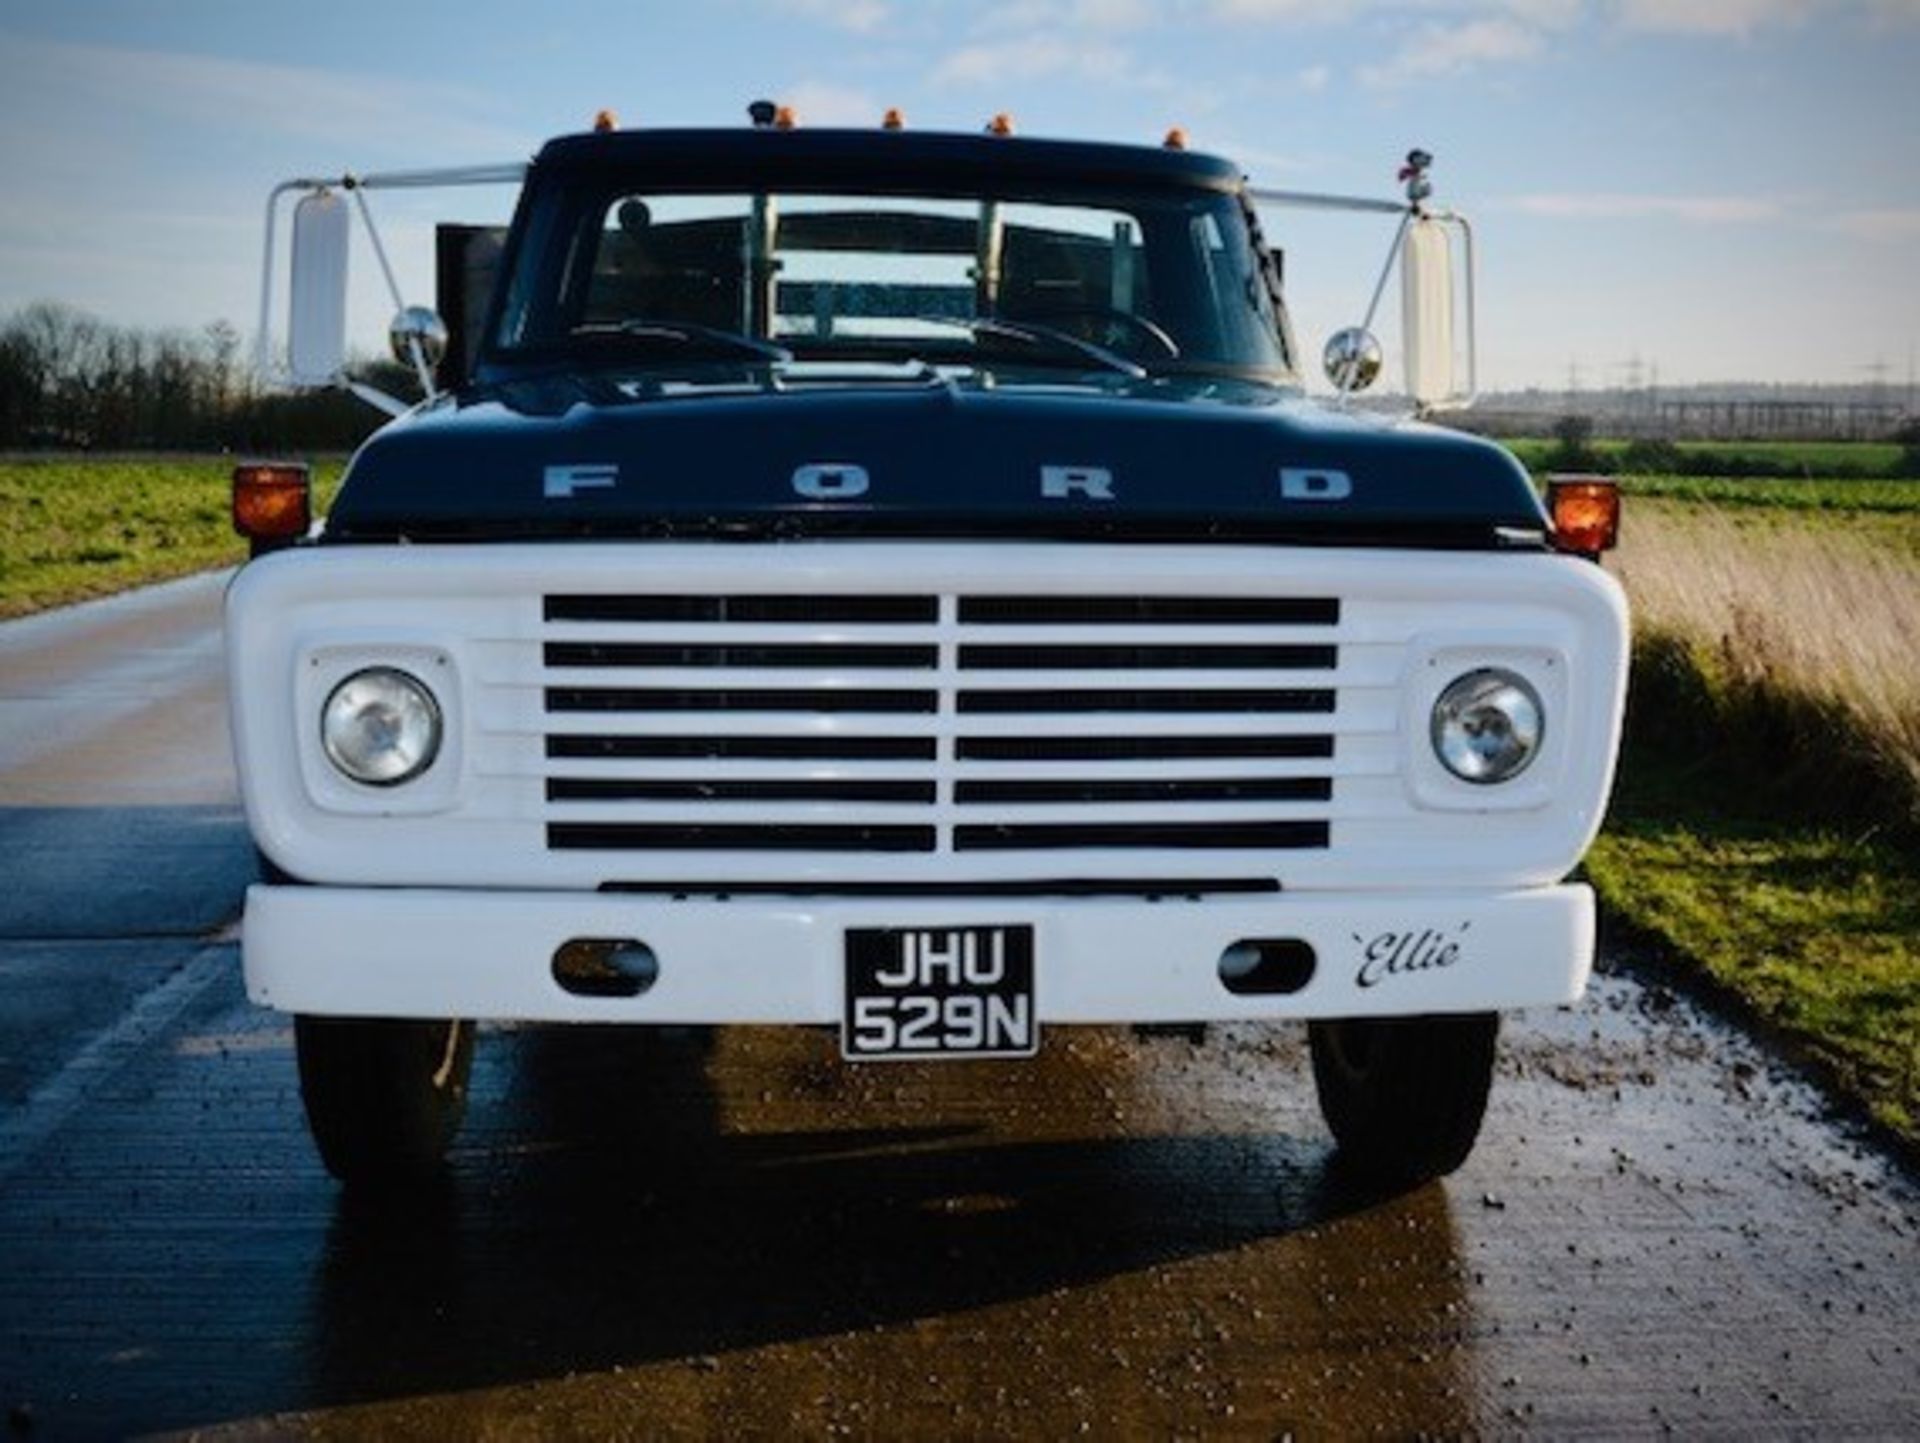 1975 Ford F600 Pick-Up Truck LHD - Image 2 of 12